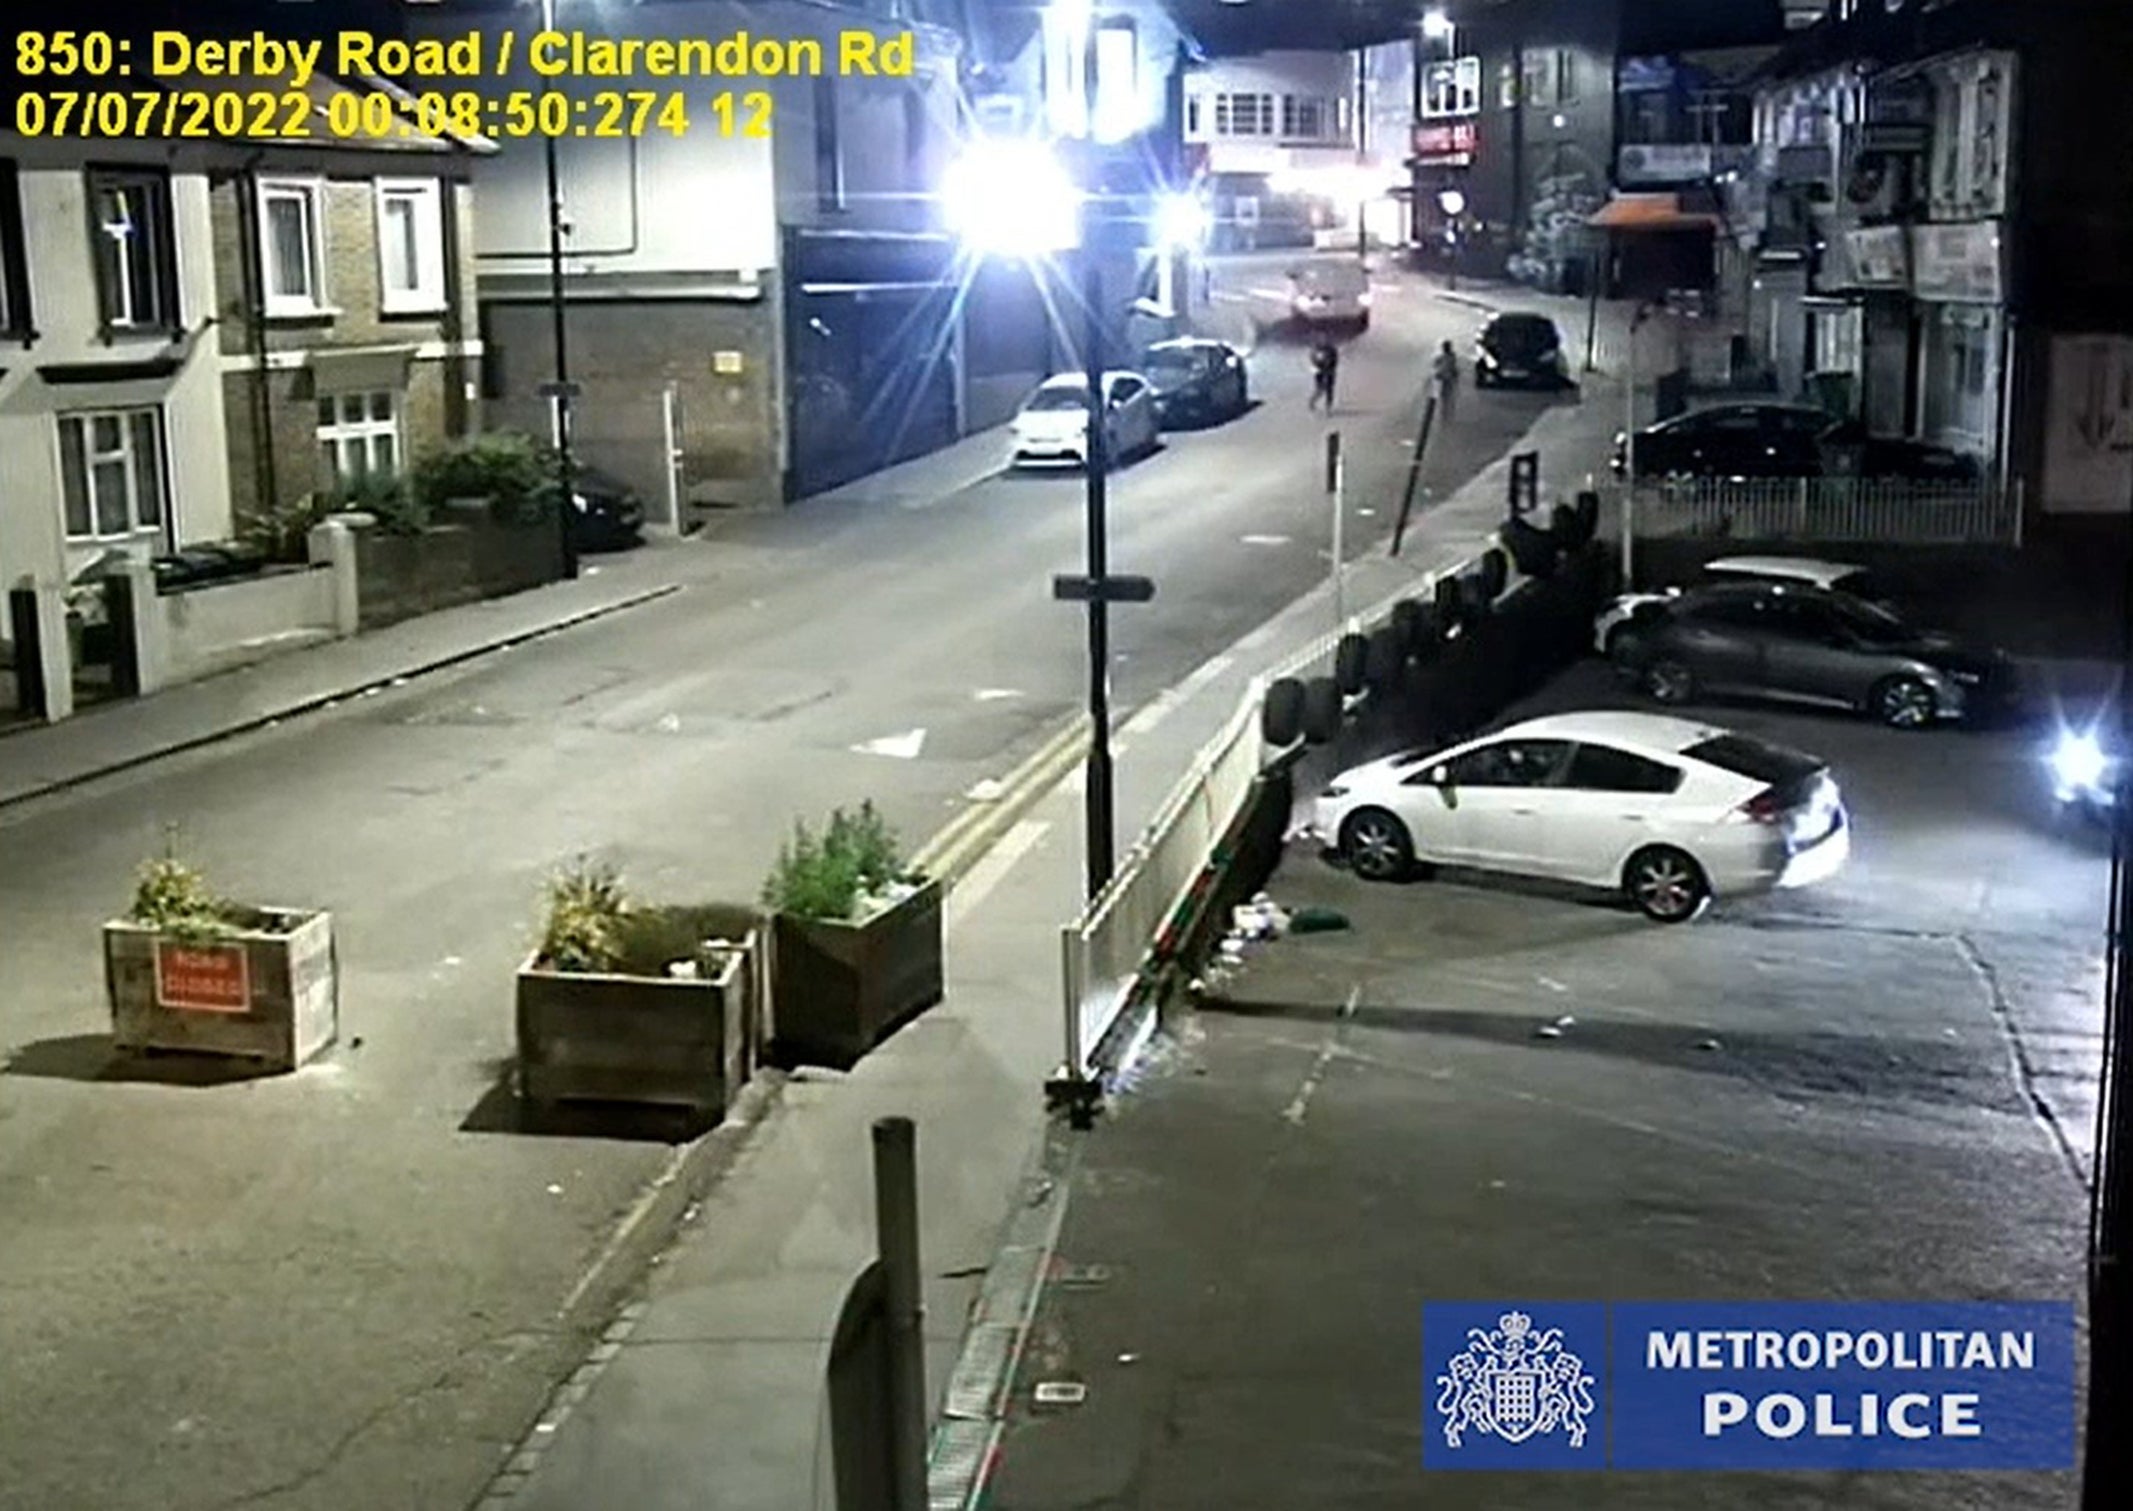 CCTV image of Owami Davies crossing Derby Road, where she was last seen in July